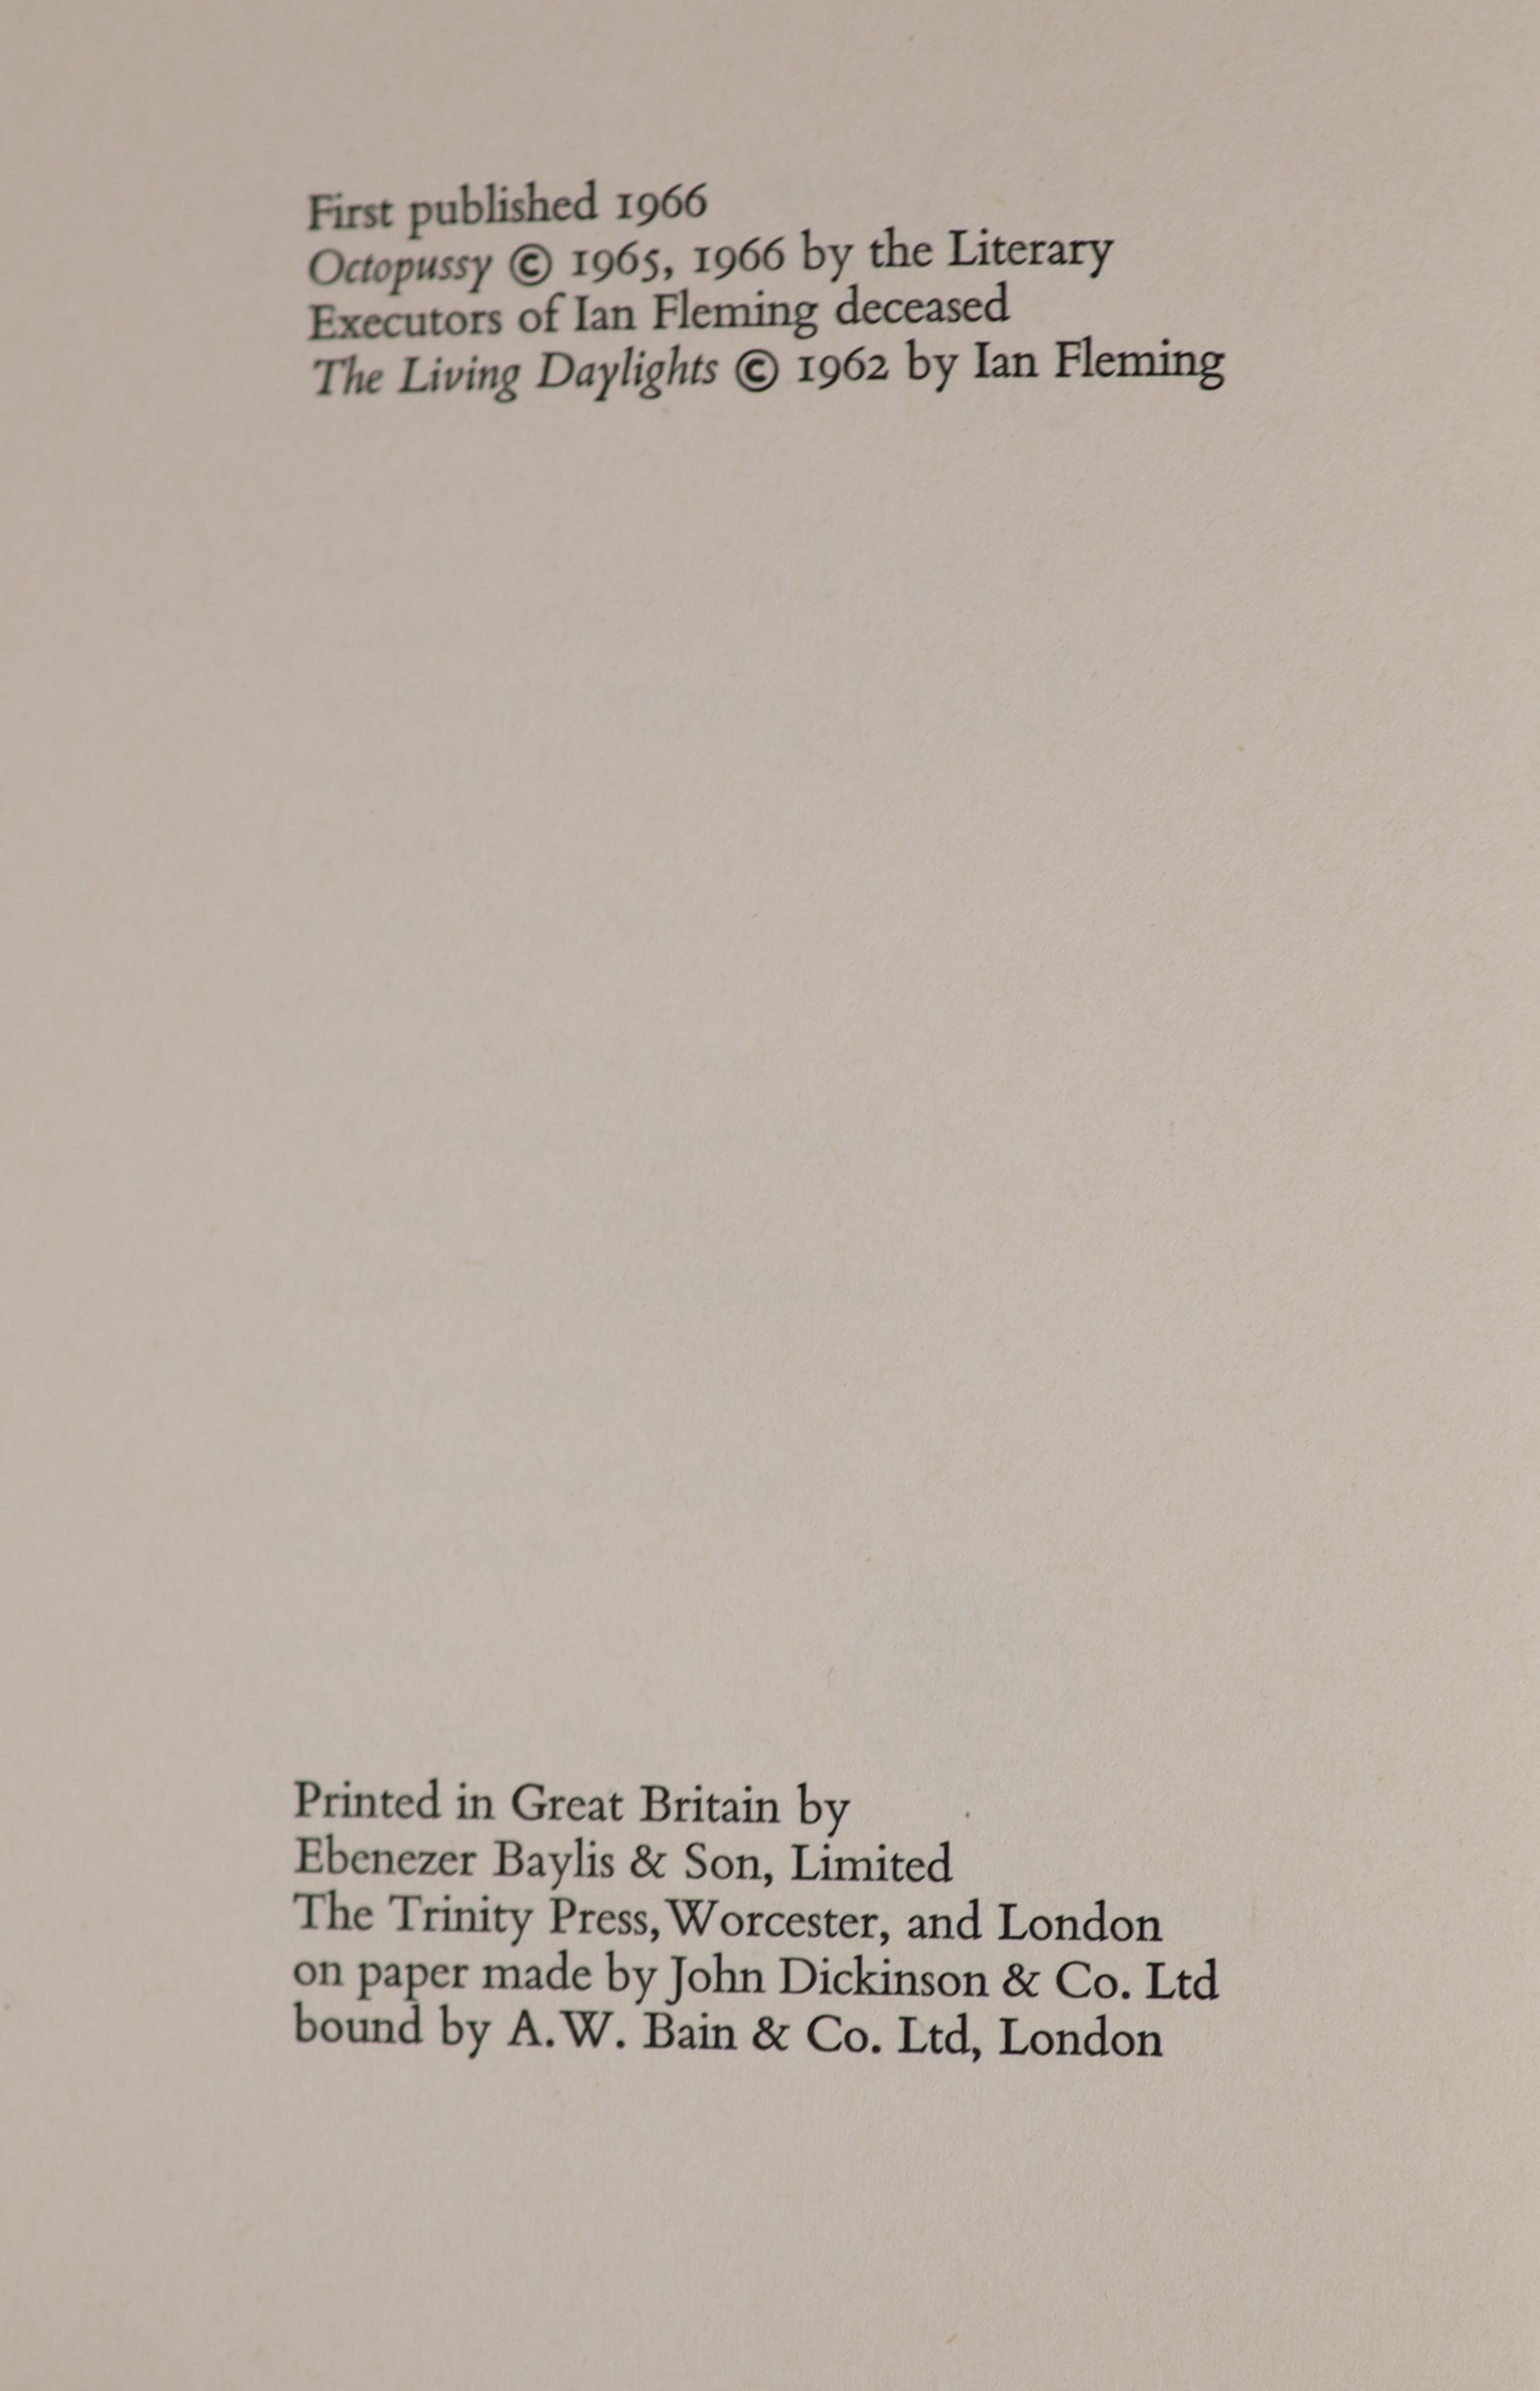 Fleming, Ian - Octopussy and The Living Daylights, 1st edition, 8vo, black cloth with stamped silver lettering, with unclipped d/j, Jonathan Cape, London, 1966